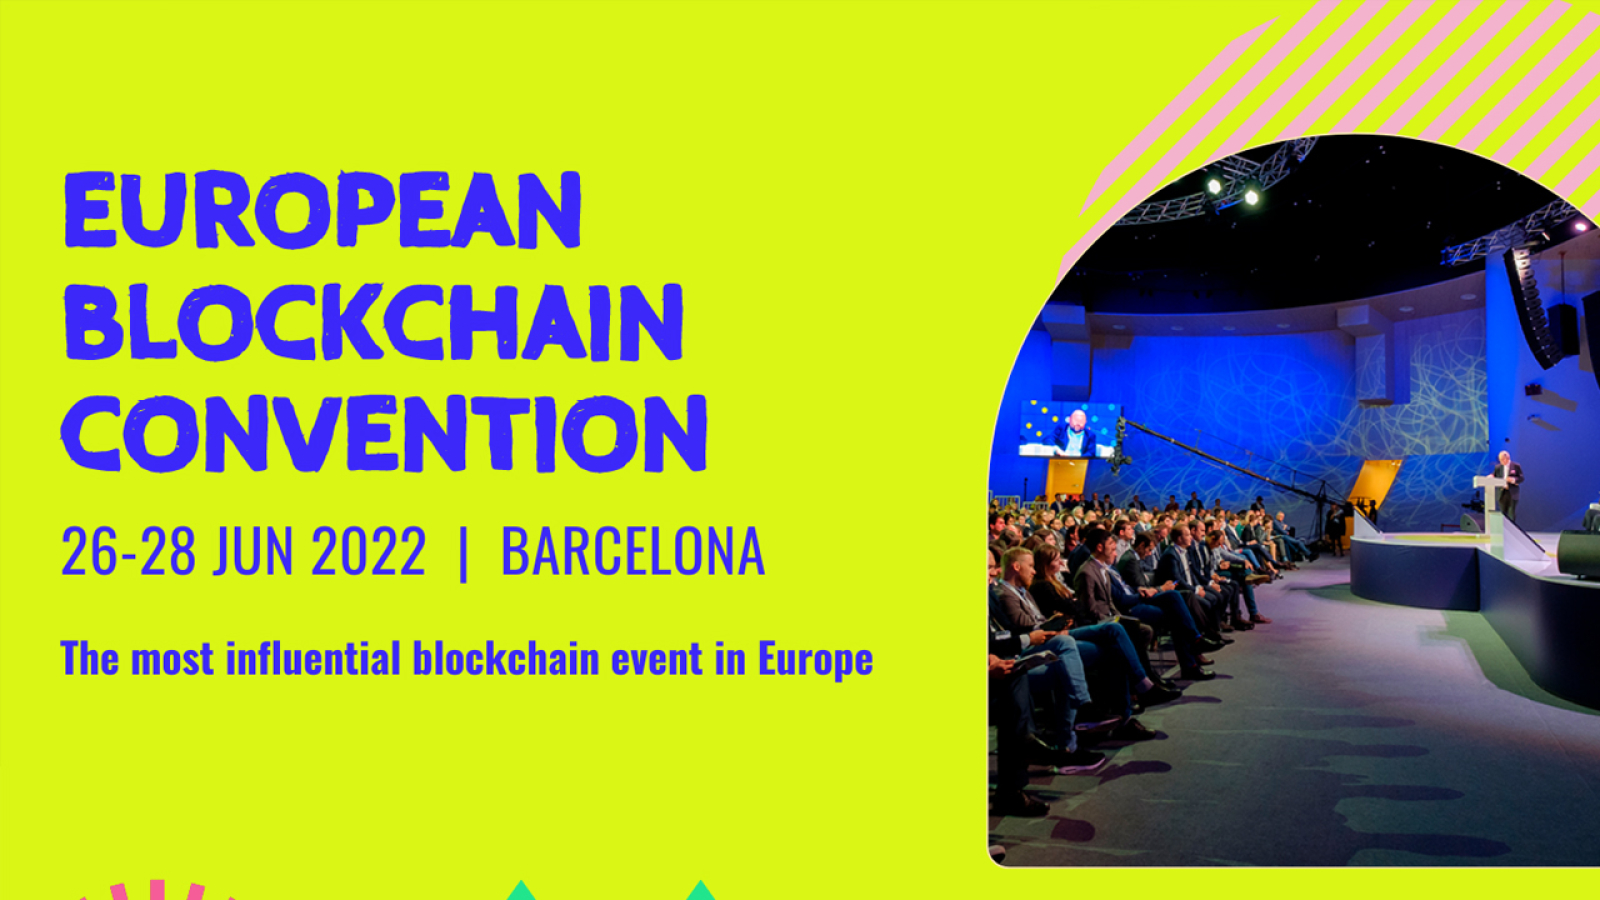 European Blockchain Convention 2022: The Most Influential Blockchain & Crypto Event in Europe Is Back in Barcelona